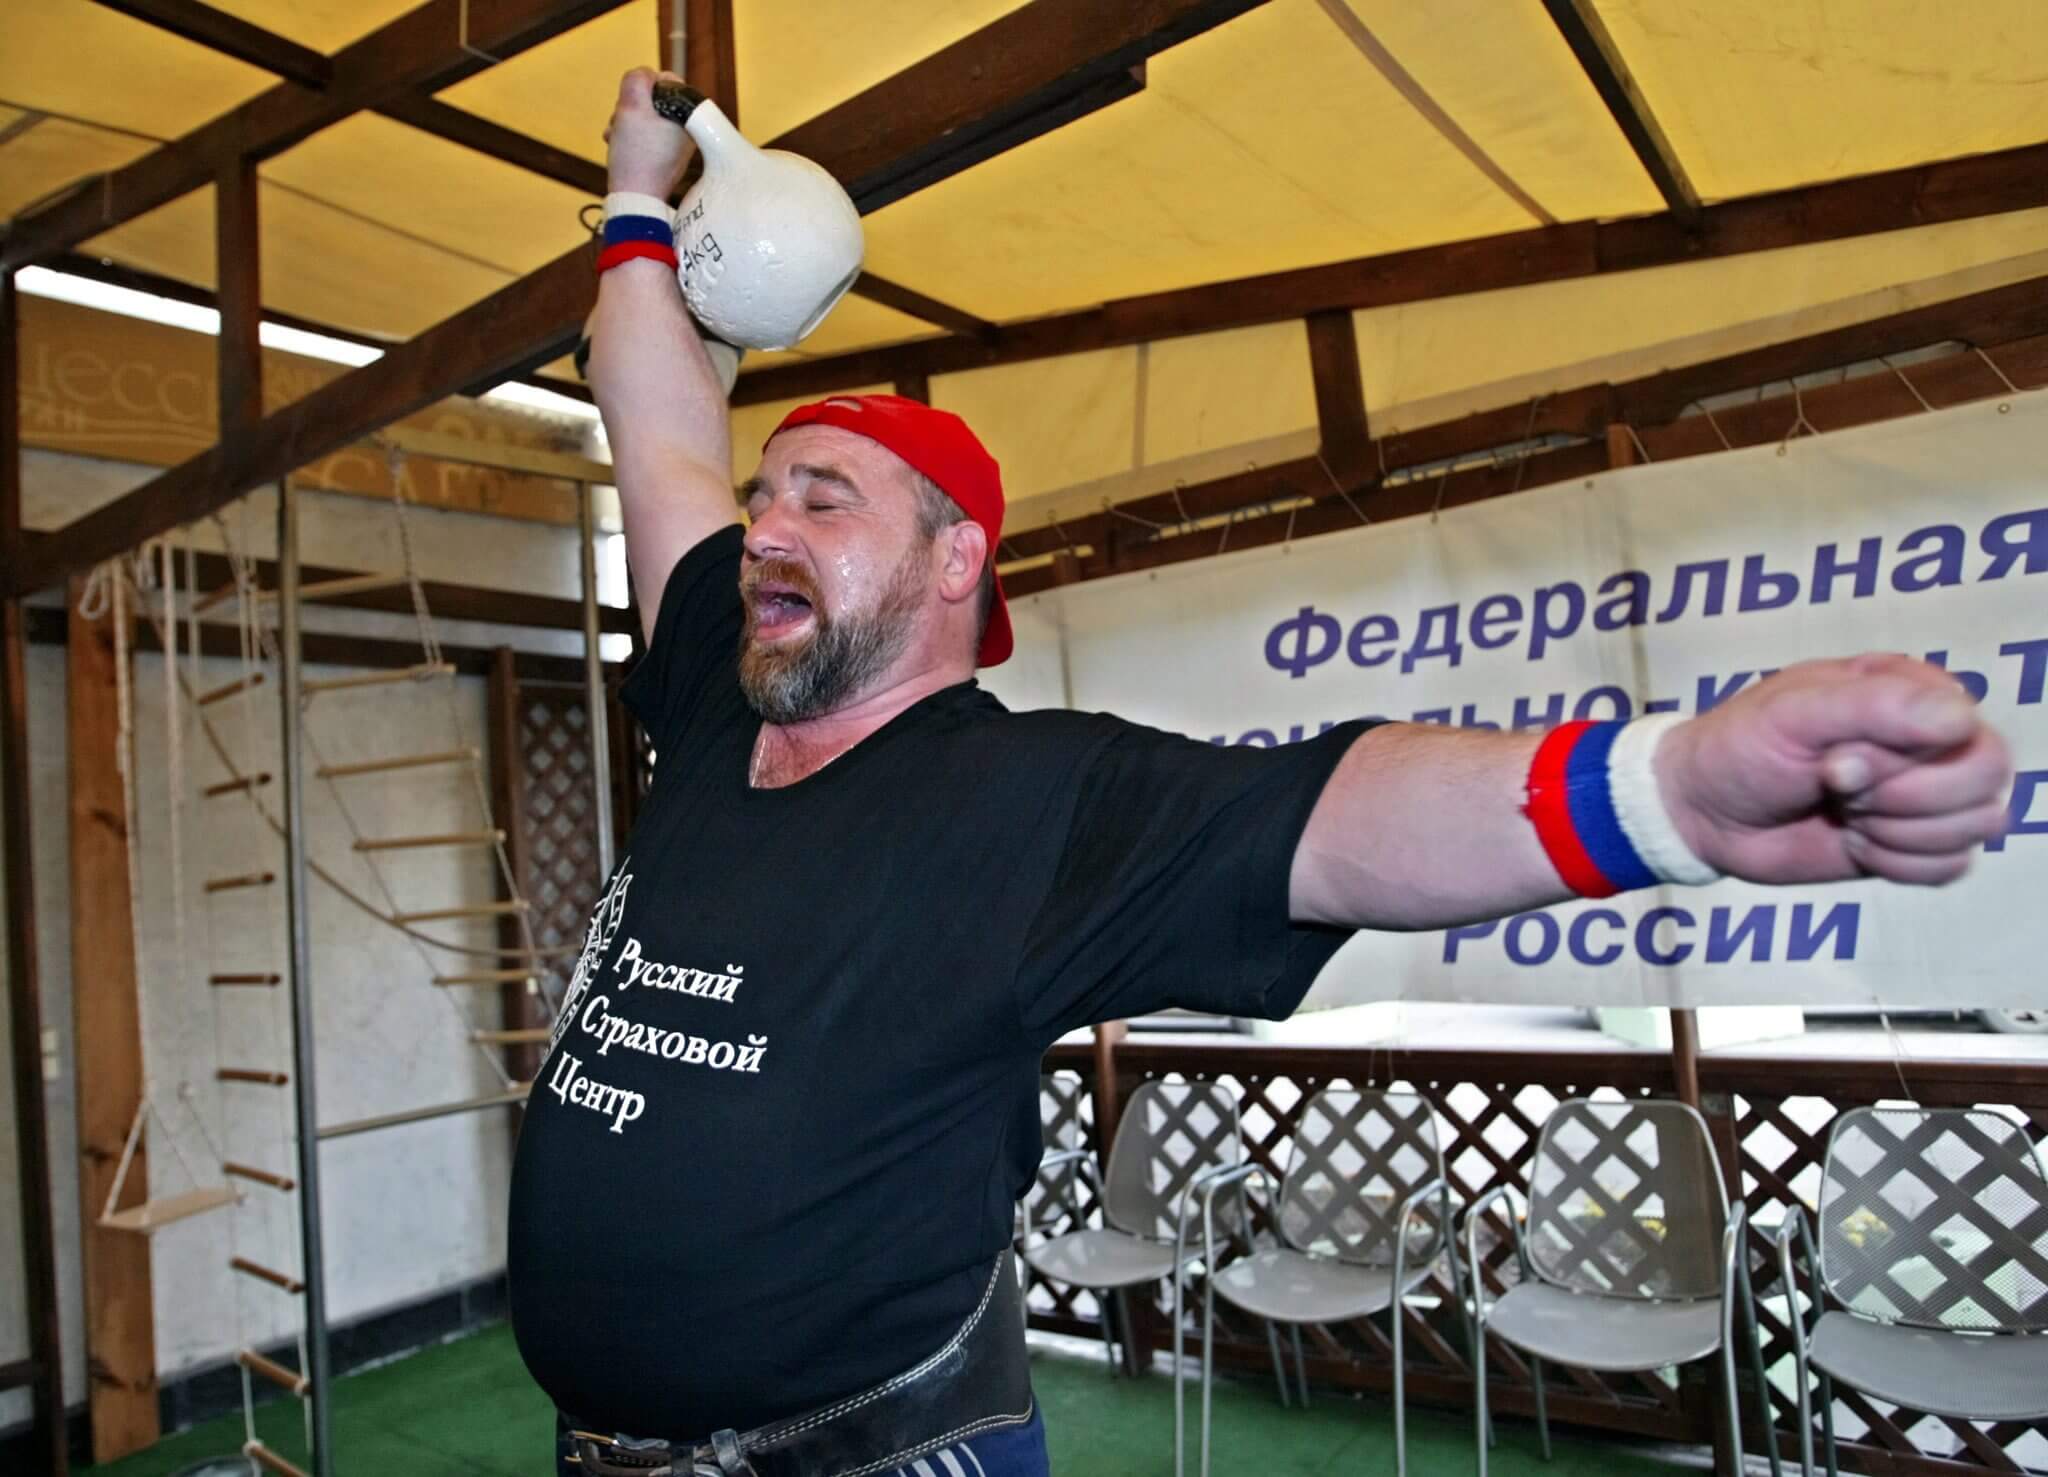 Vladimir Savelyev Gets Ready For a New Entry in the Guinness Record Book of Records On Wednesday 15 October 2003 in Moscow the Previous Record by Savelyev Was 24 Kilograms Lifted 19 275 Times in 24 Hours This Time He Managed to Lift the Weight 20 170 Times Marking a New World Record Which Was Devoted to the Inthronisation the 50th Anniversary of Britain's Queen Elizabeth Ii